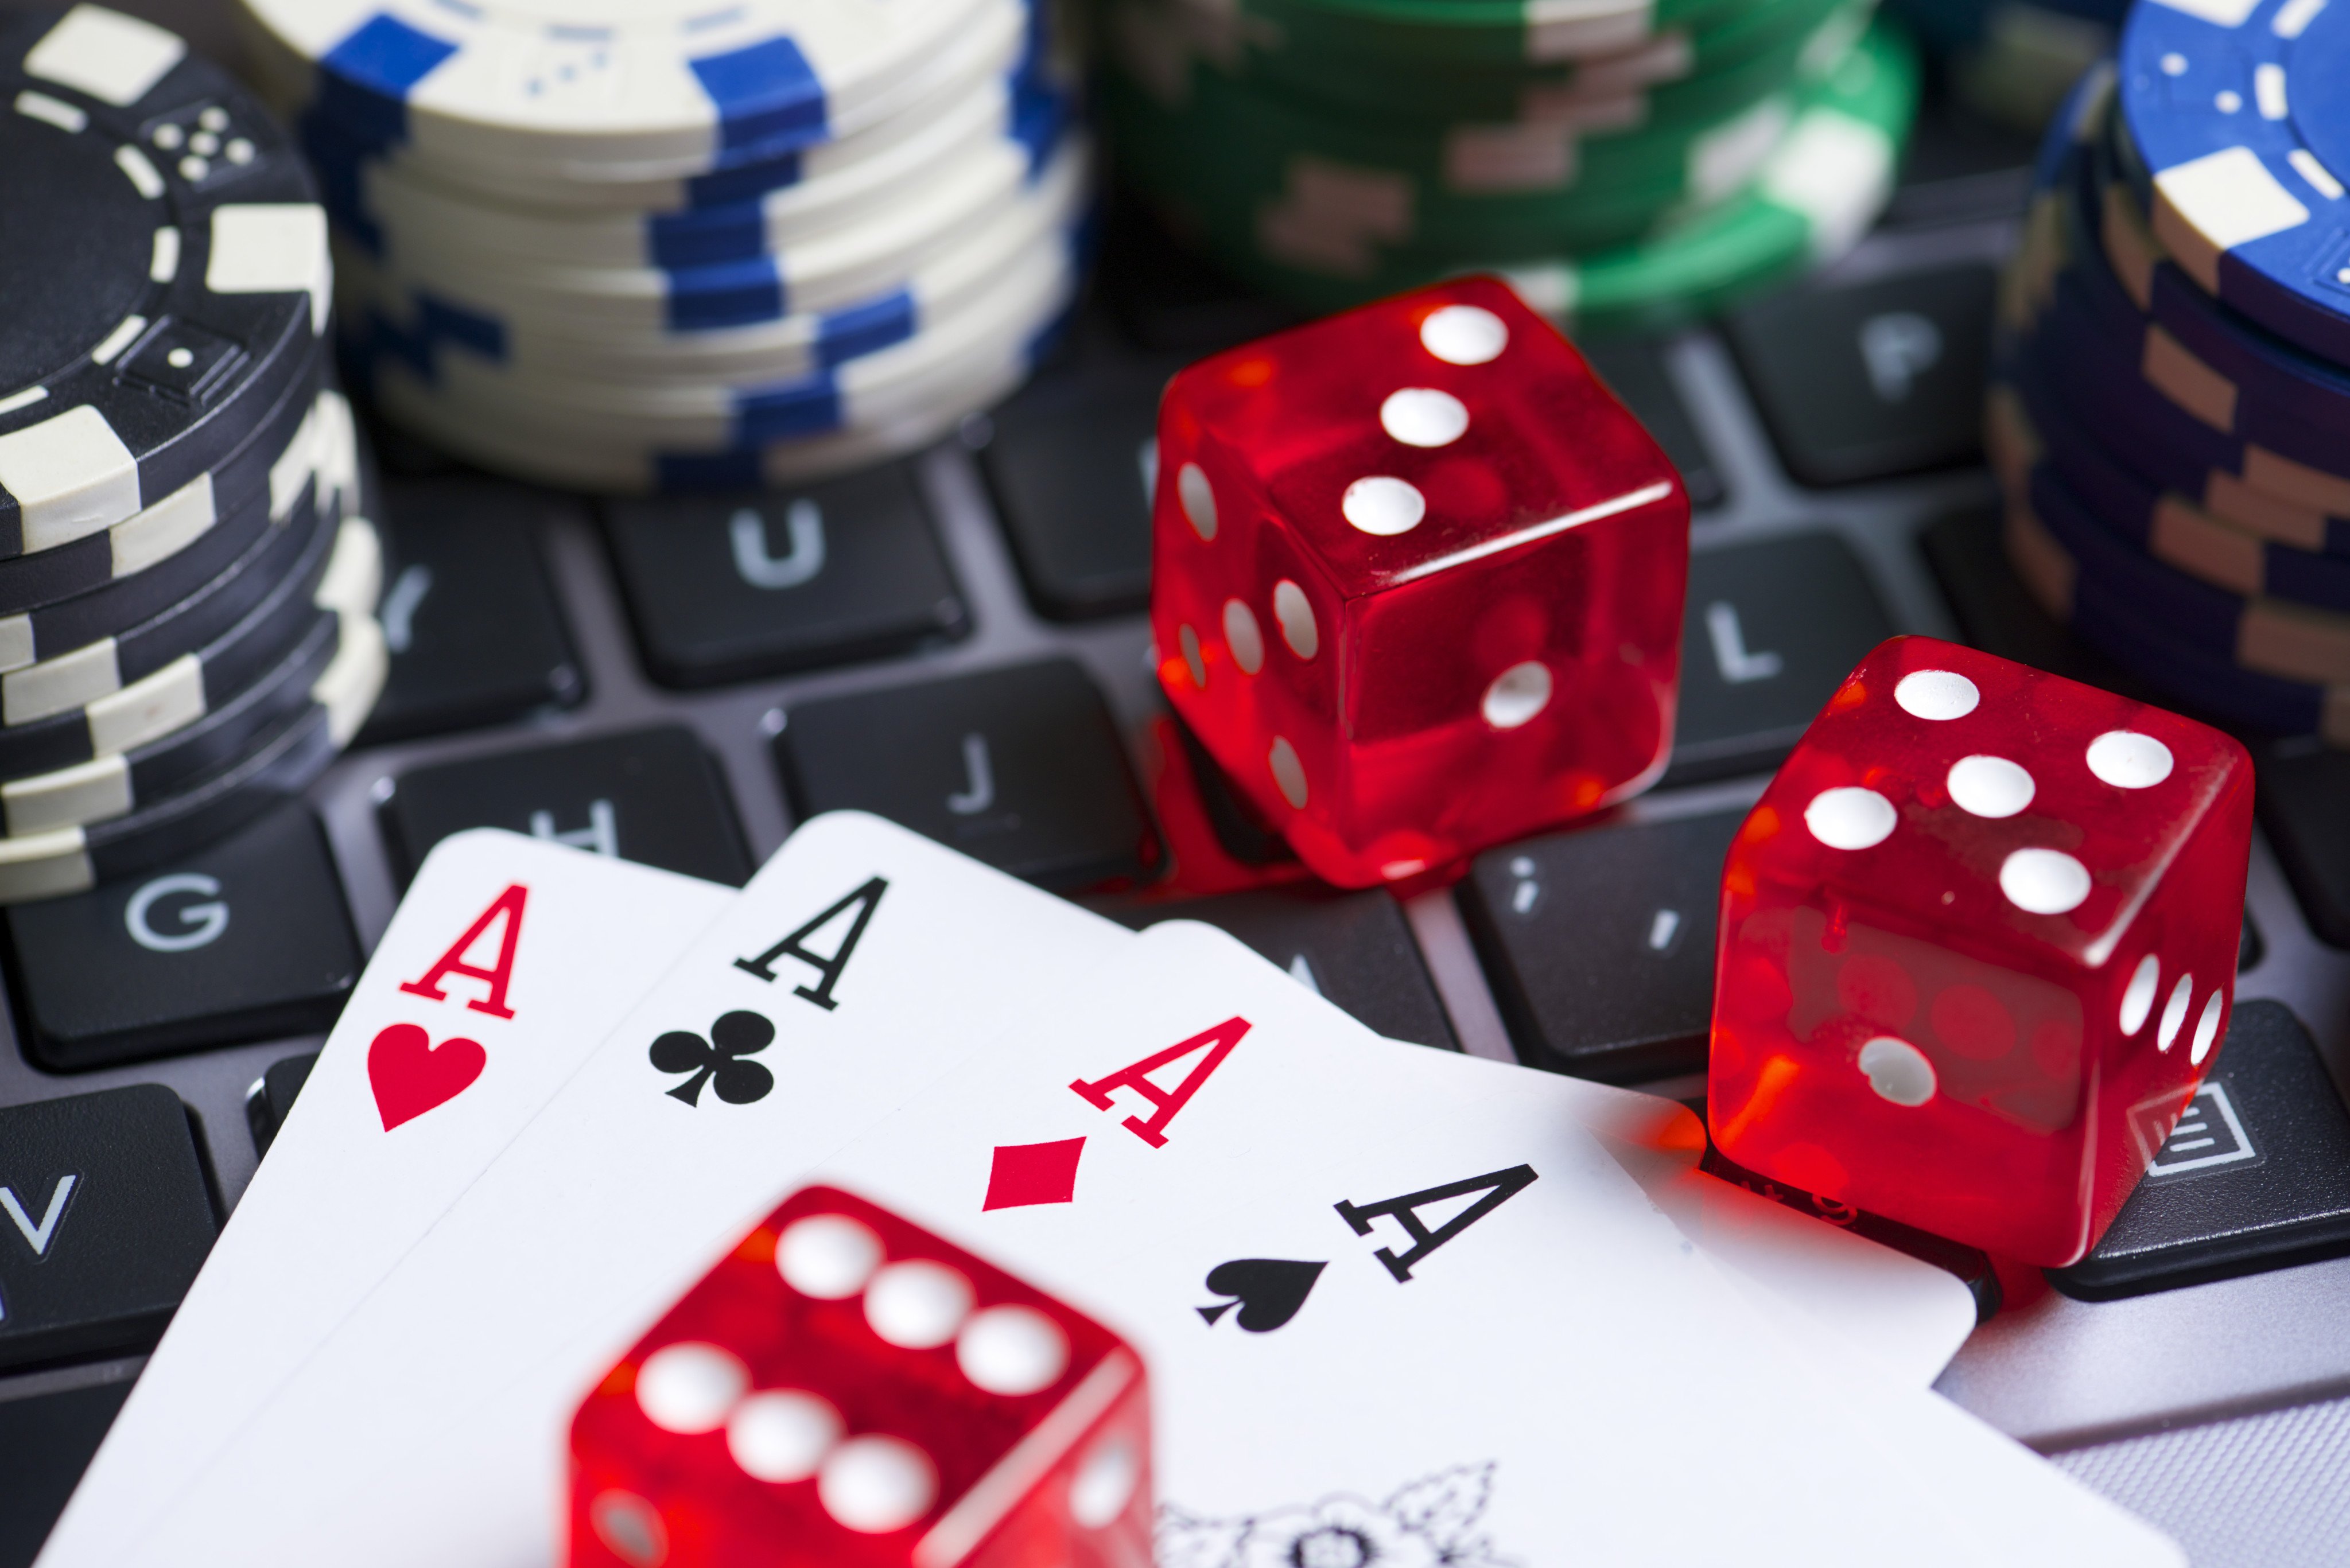 Hong Kong police arrest social media influencer accused of gambling  illegally at online casino, promoting bookmaking | South China Morning Post